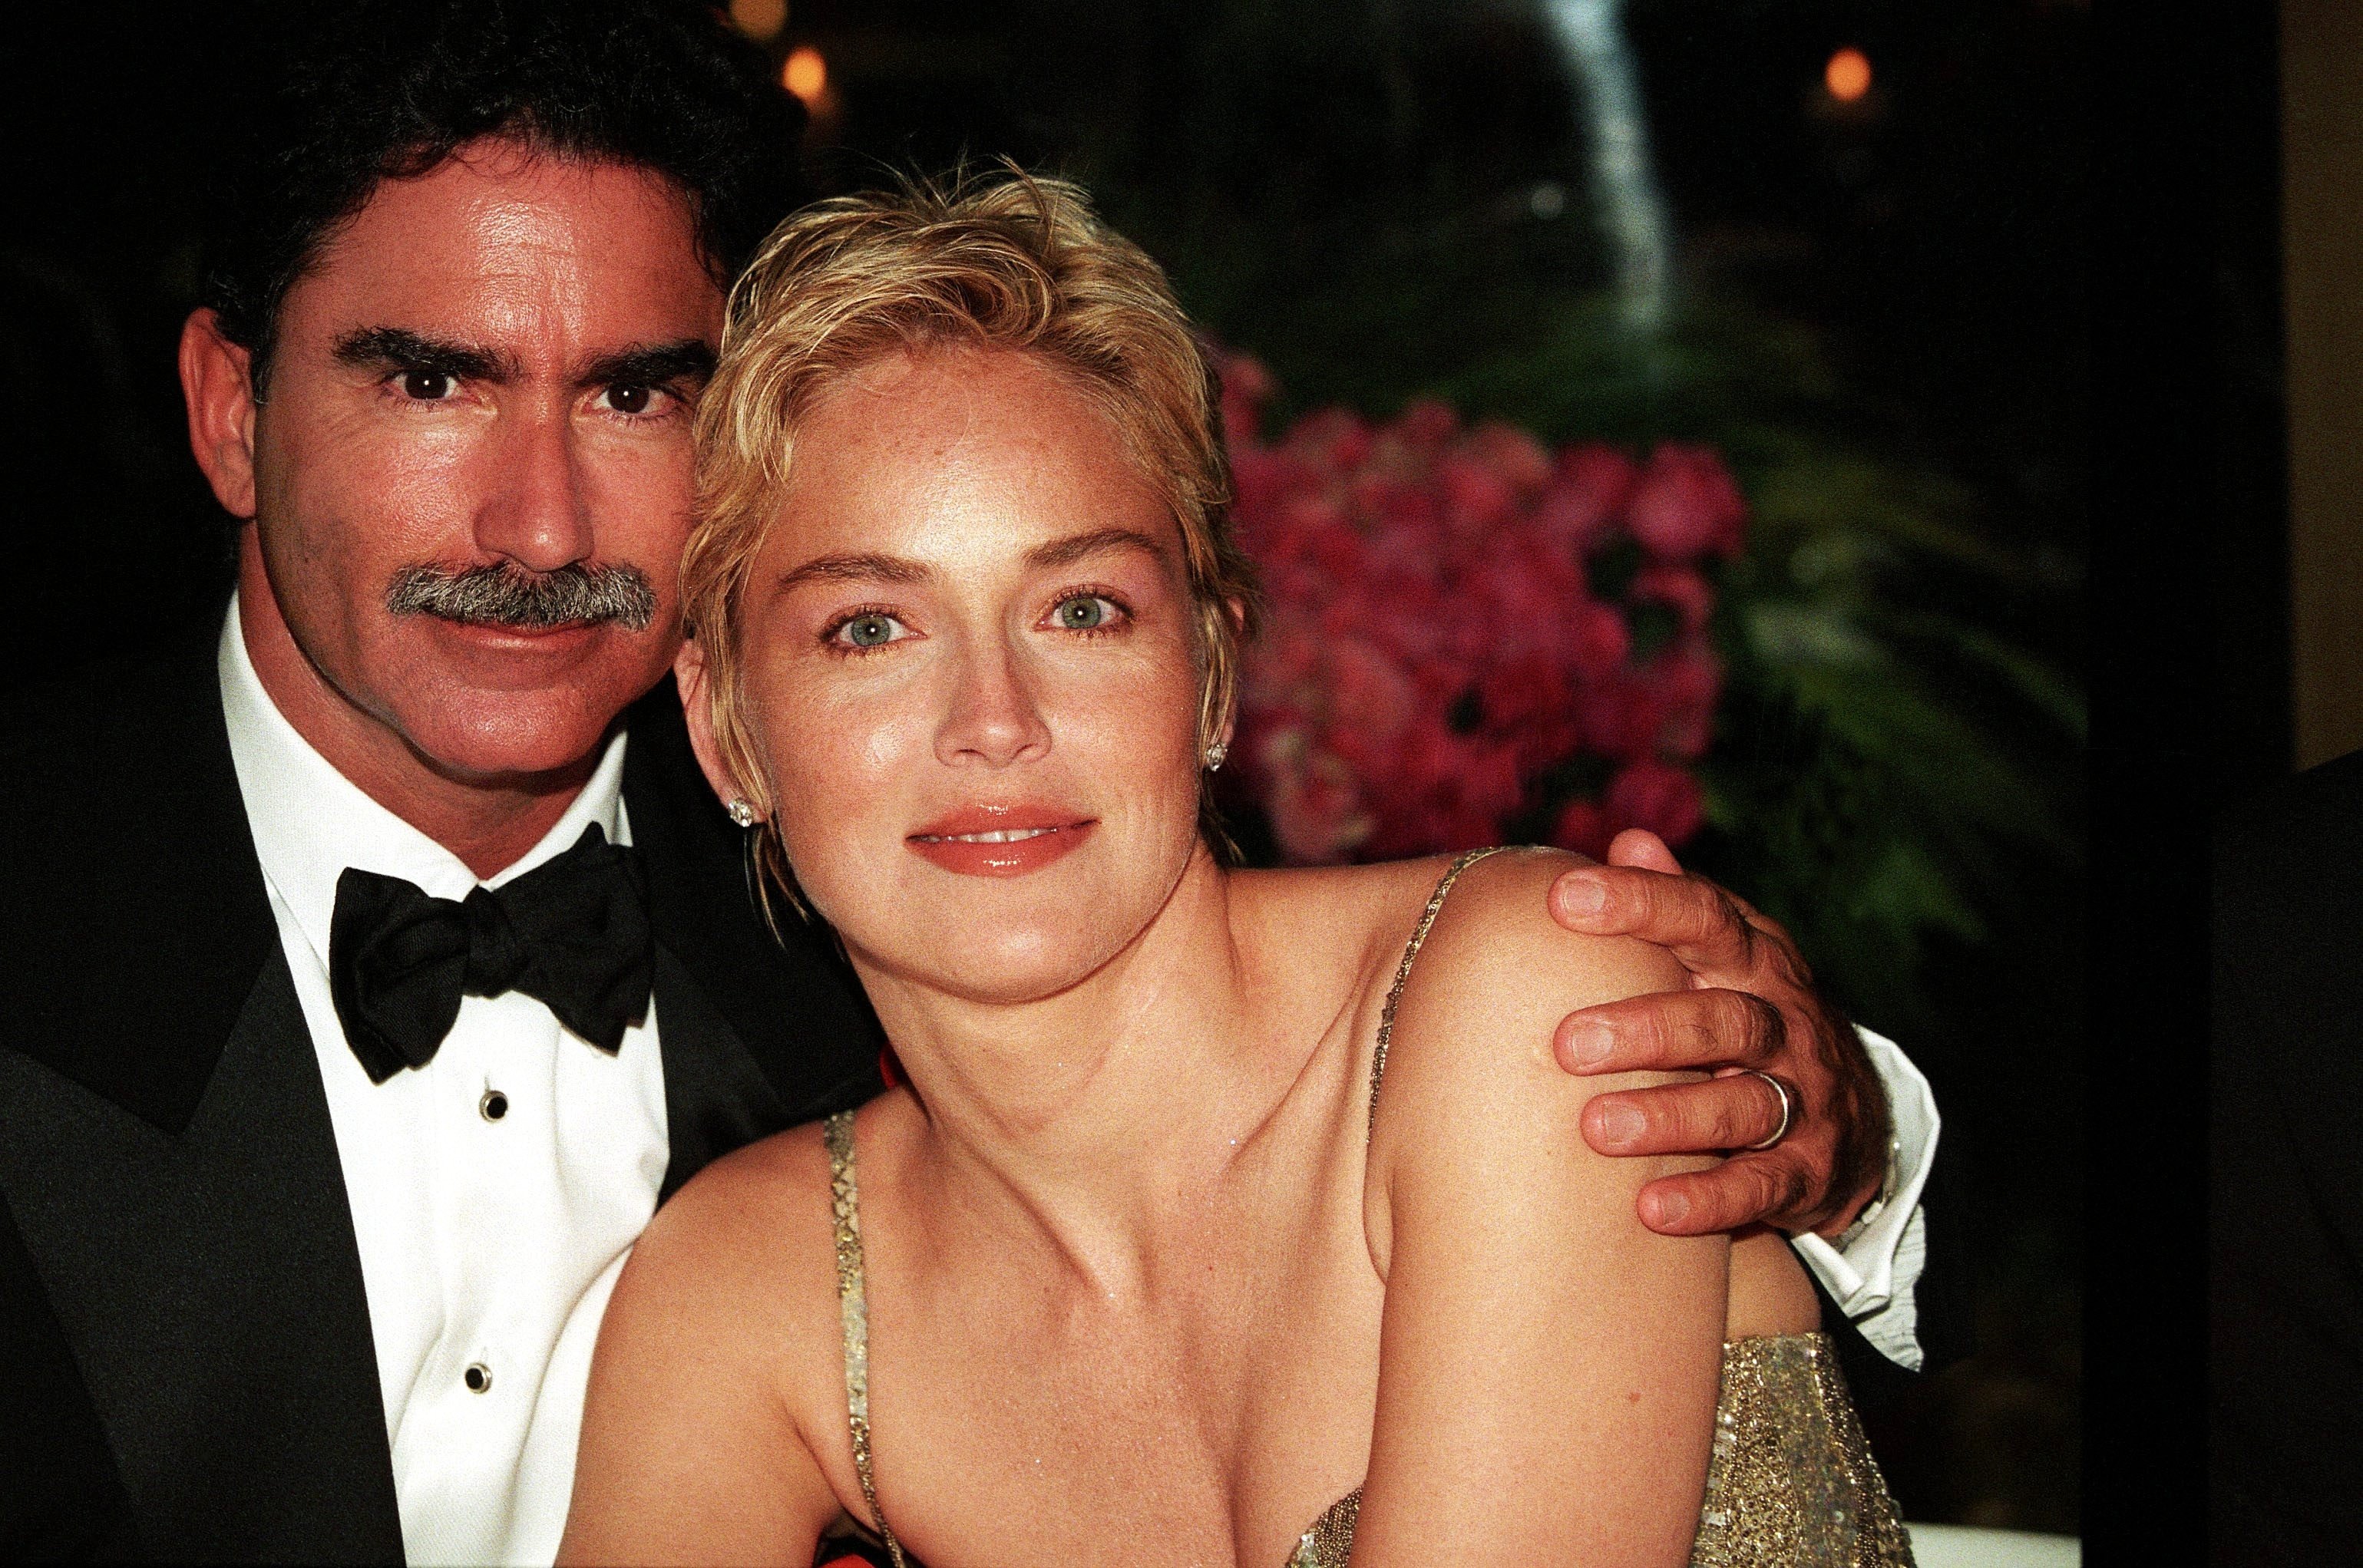 Phil Bronstein and Sharon Stone at "Amfar's" Evening at Moulin in Mougins, France, on May 21, 1998. | Source: Pool Benainous/DUCLOS/Gamma-Rapho/Getty Images